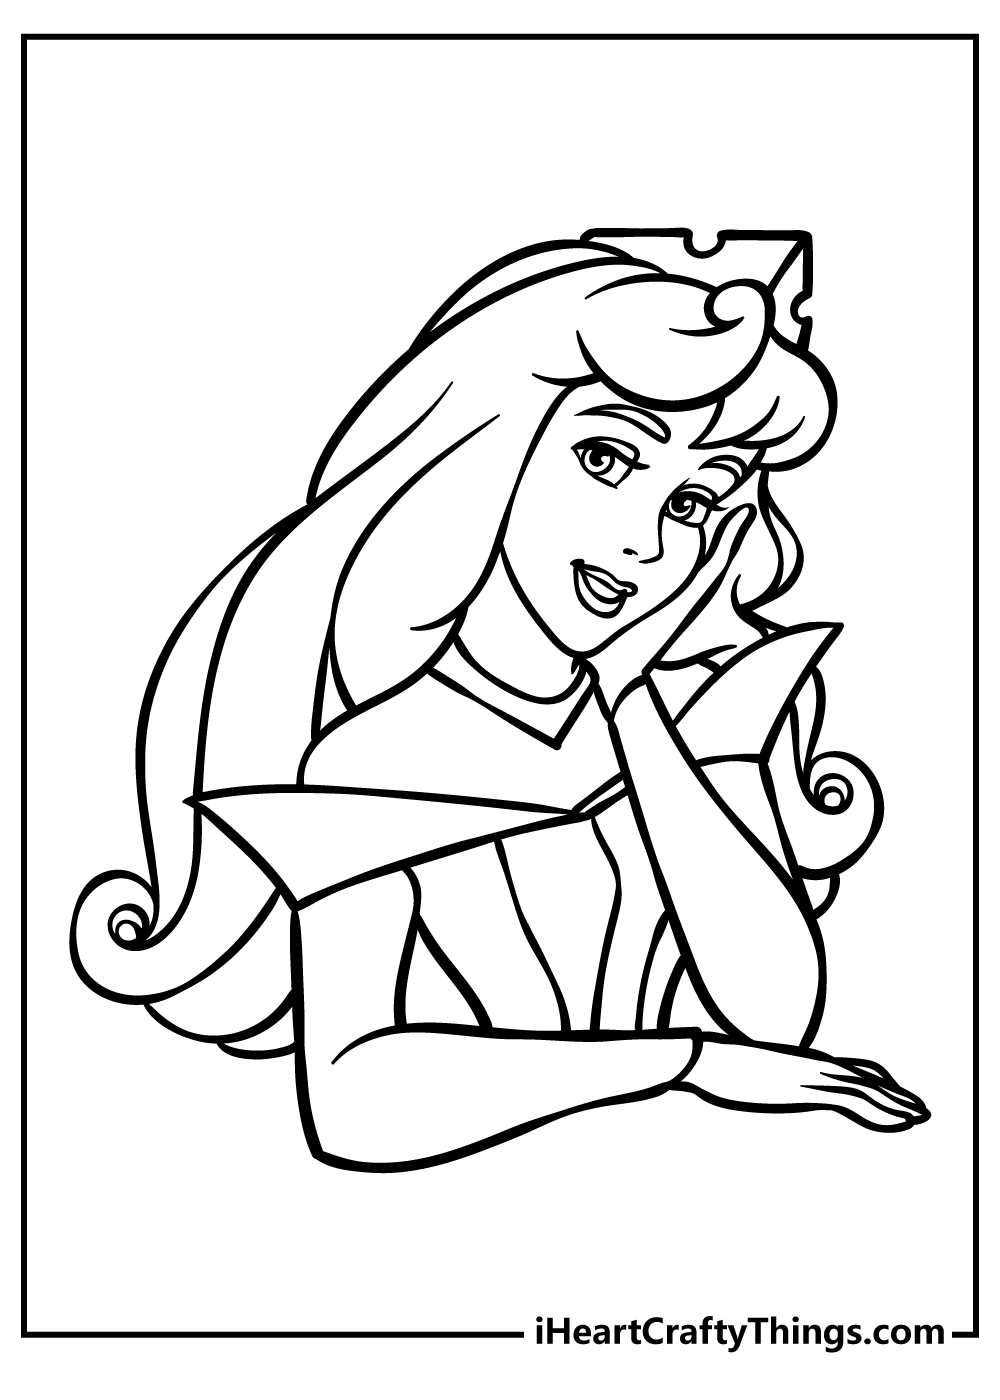 Sleeping Beauty Coloring Pages for adults free printable